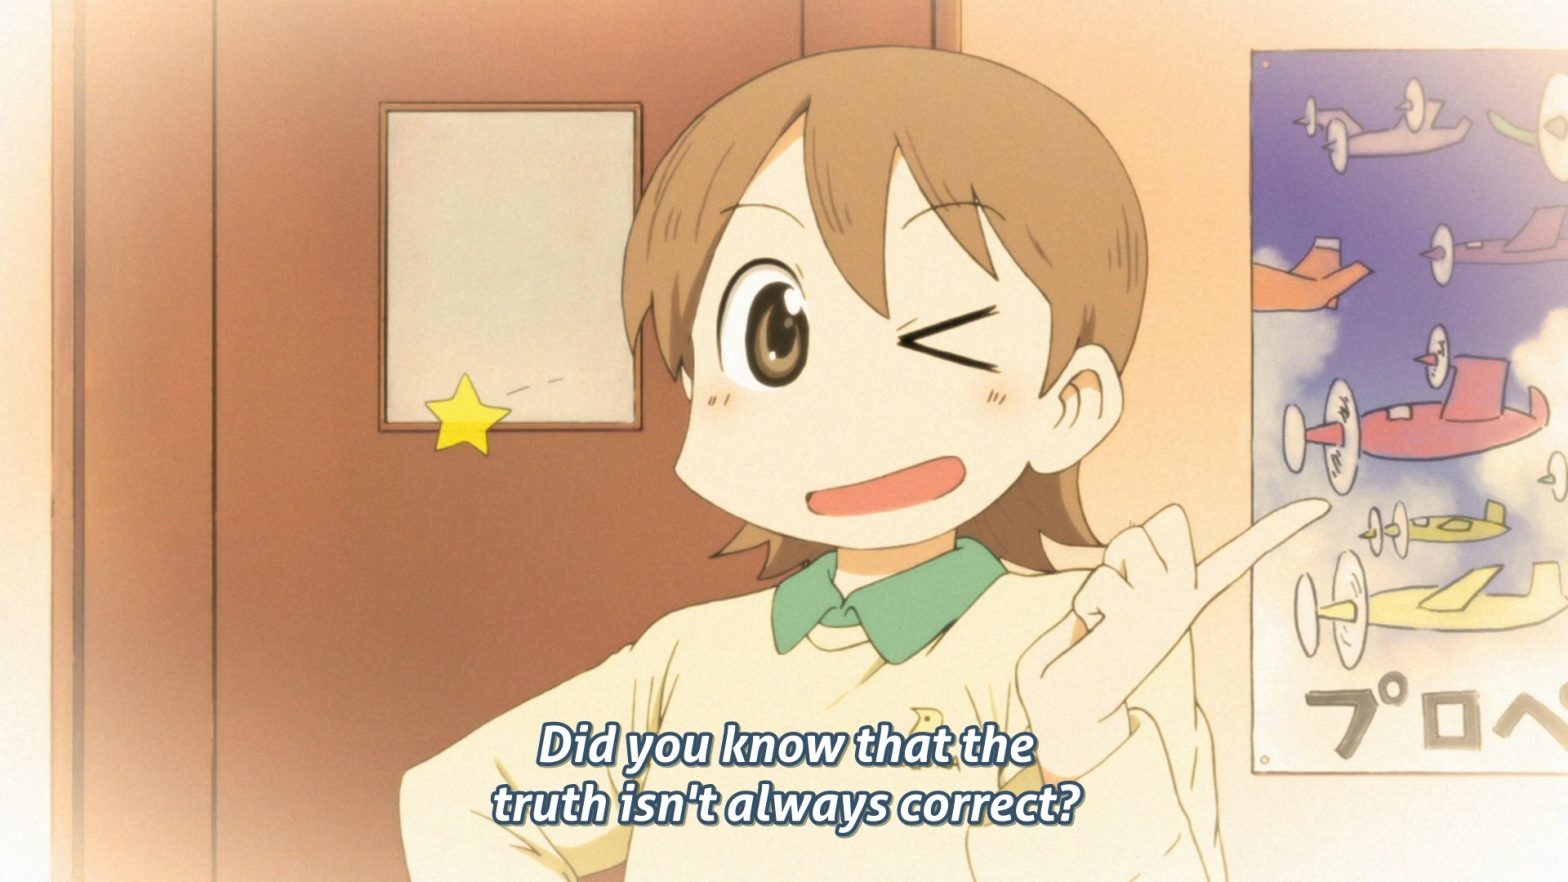 Nichijou and the Absurdity of Everyday Life